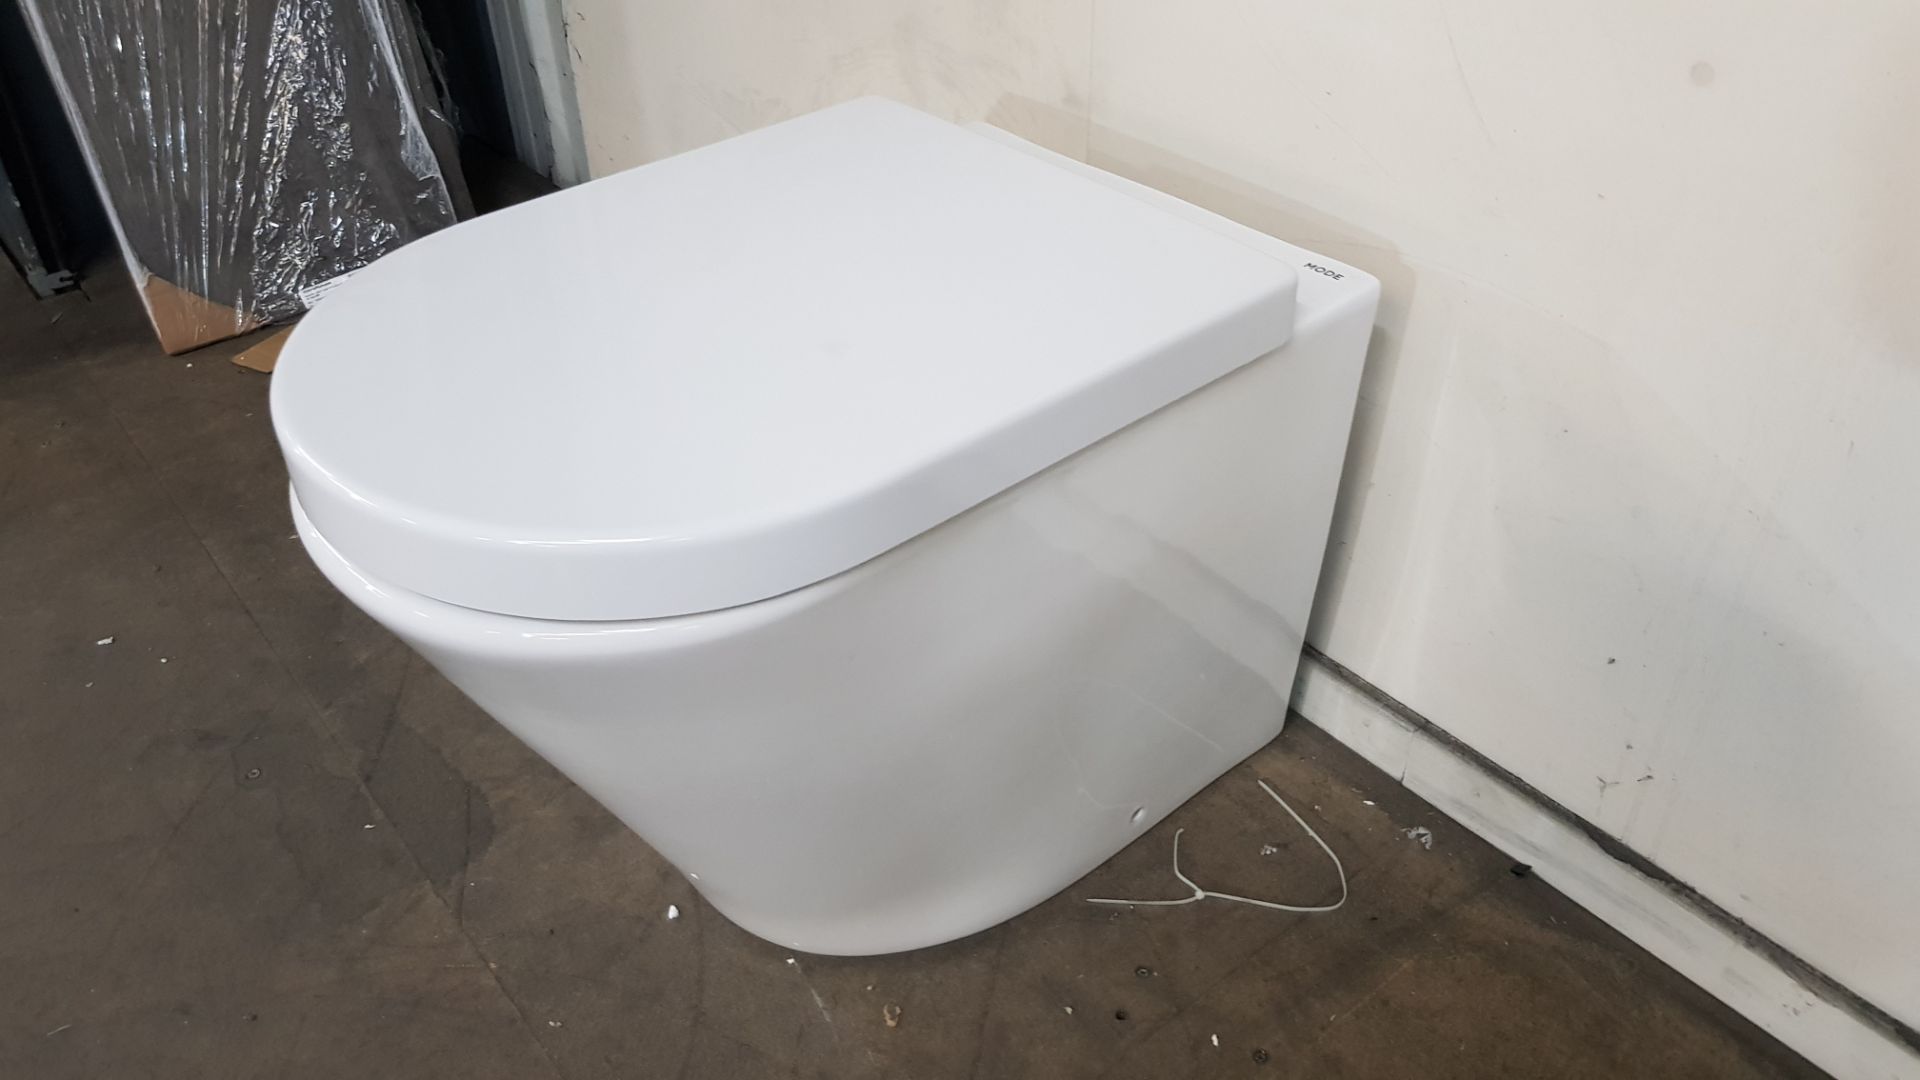 Mode Trim Back To Wall Toilet Pan With Seat - Image 4 of 6